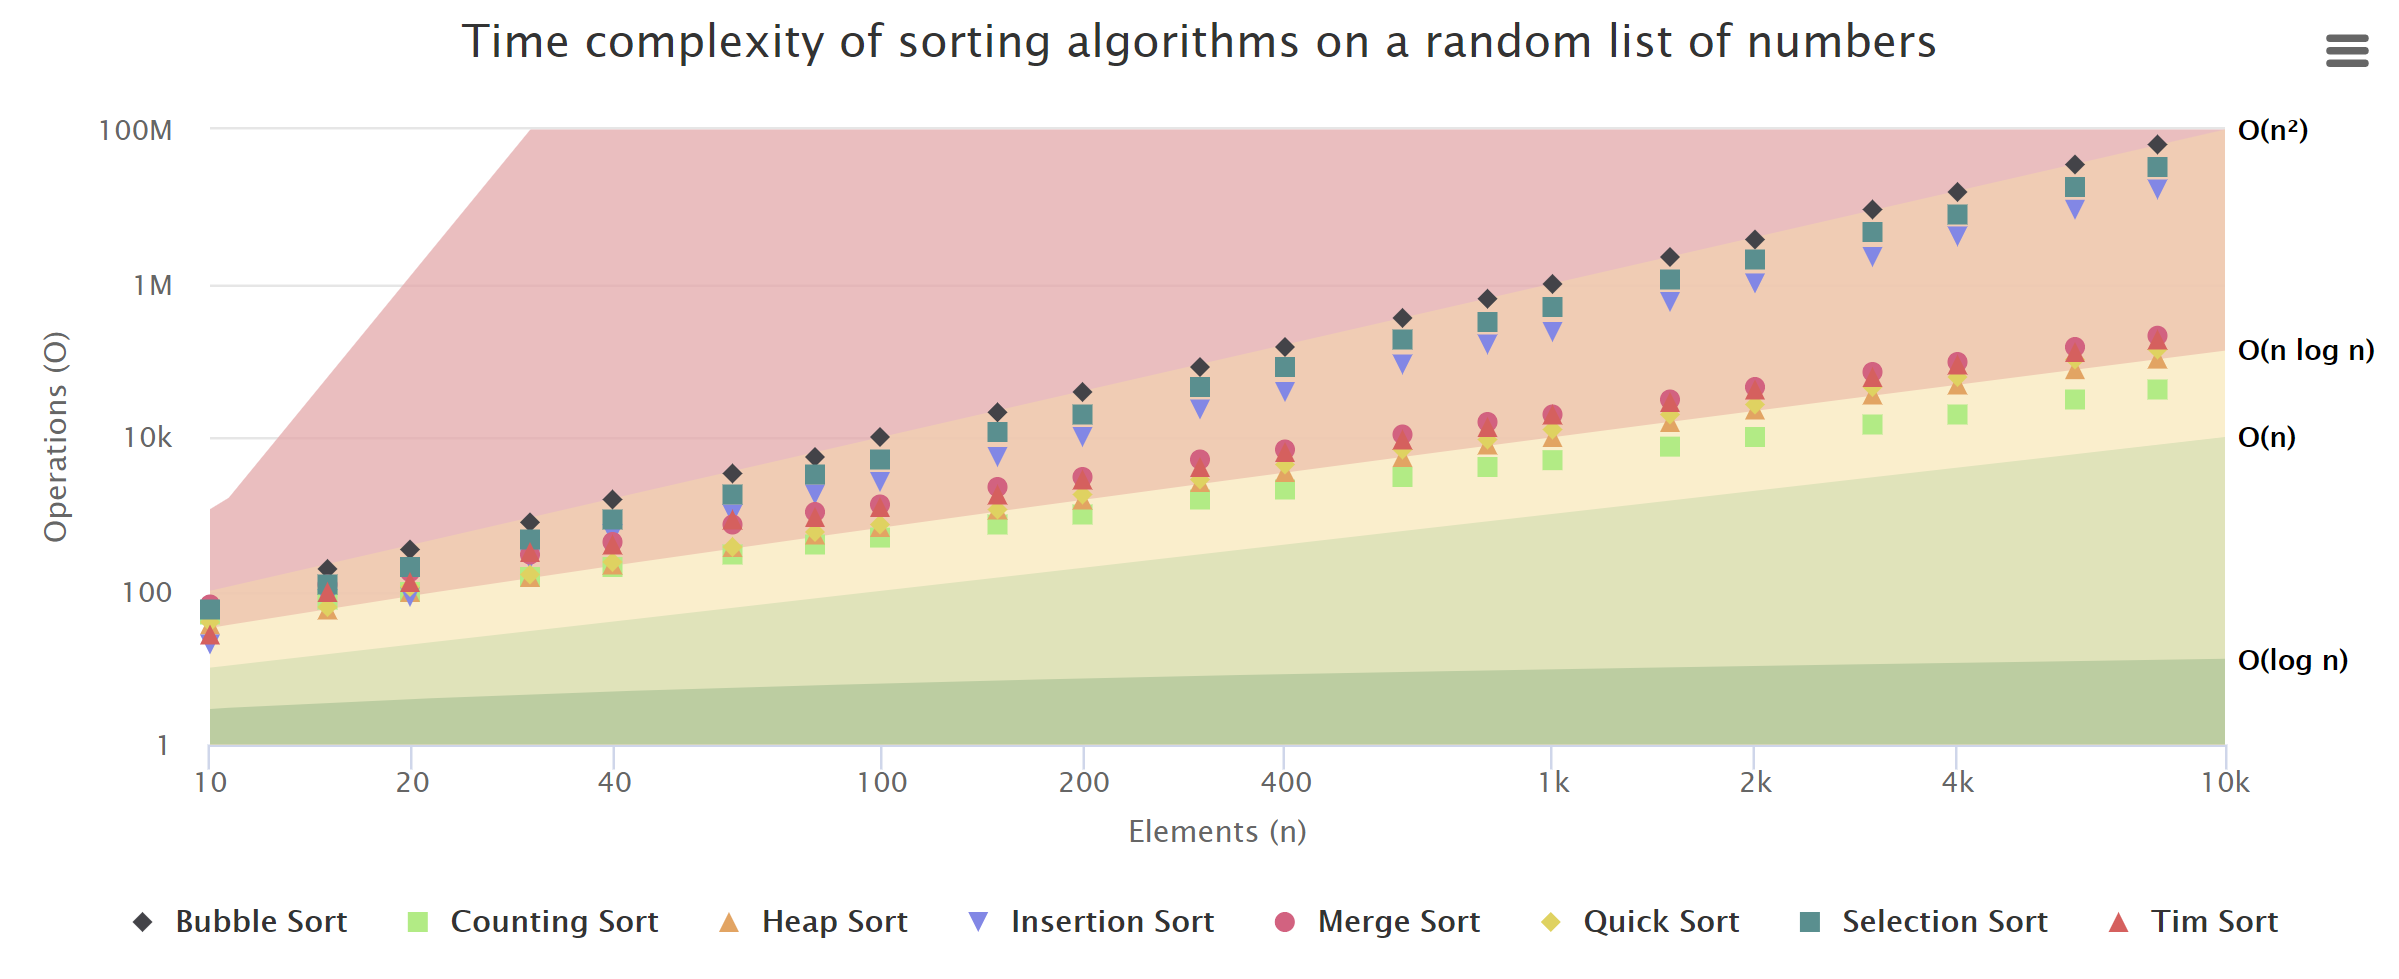 Time complexity of sorting algorithms on a random list of numbers